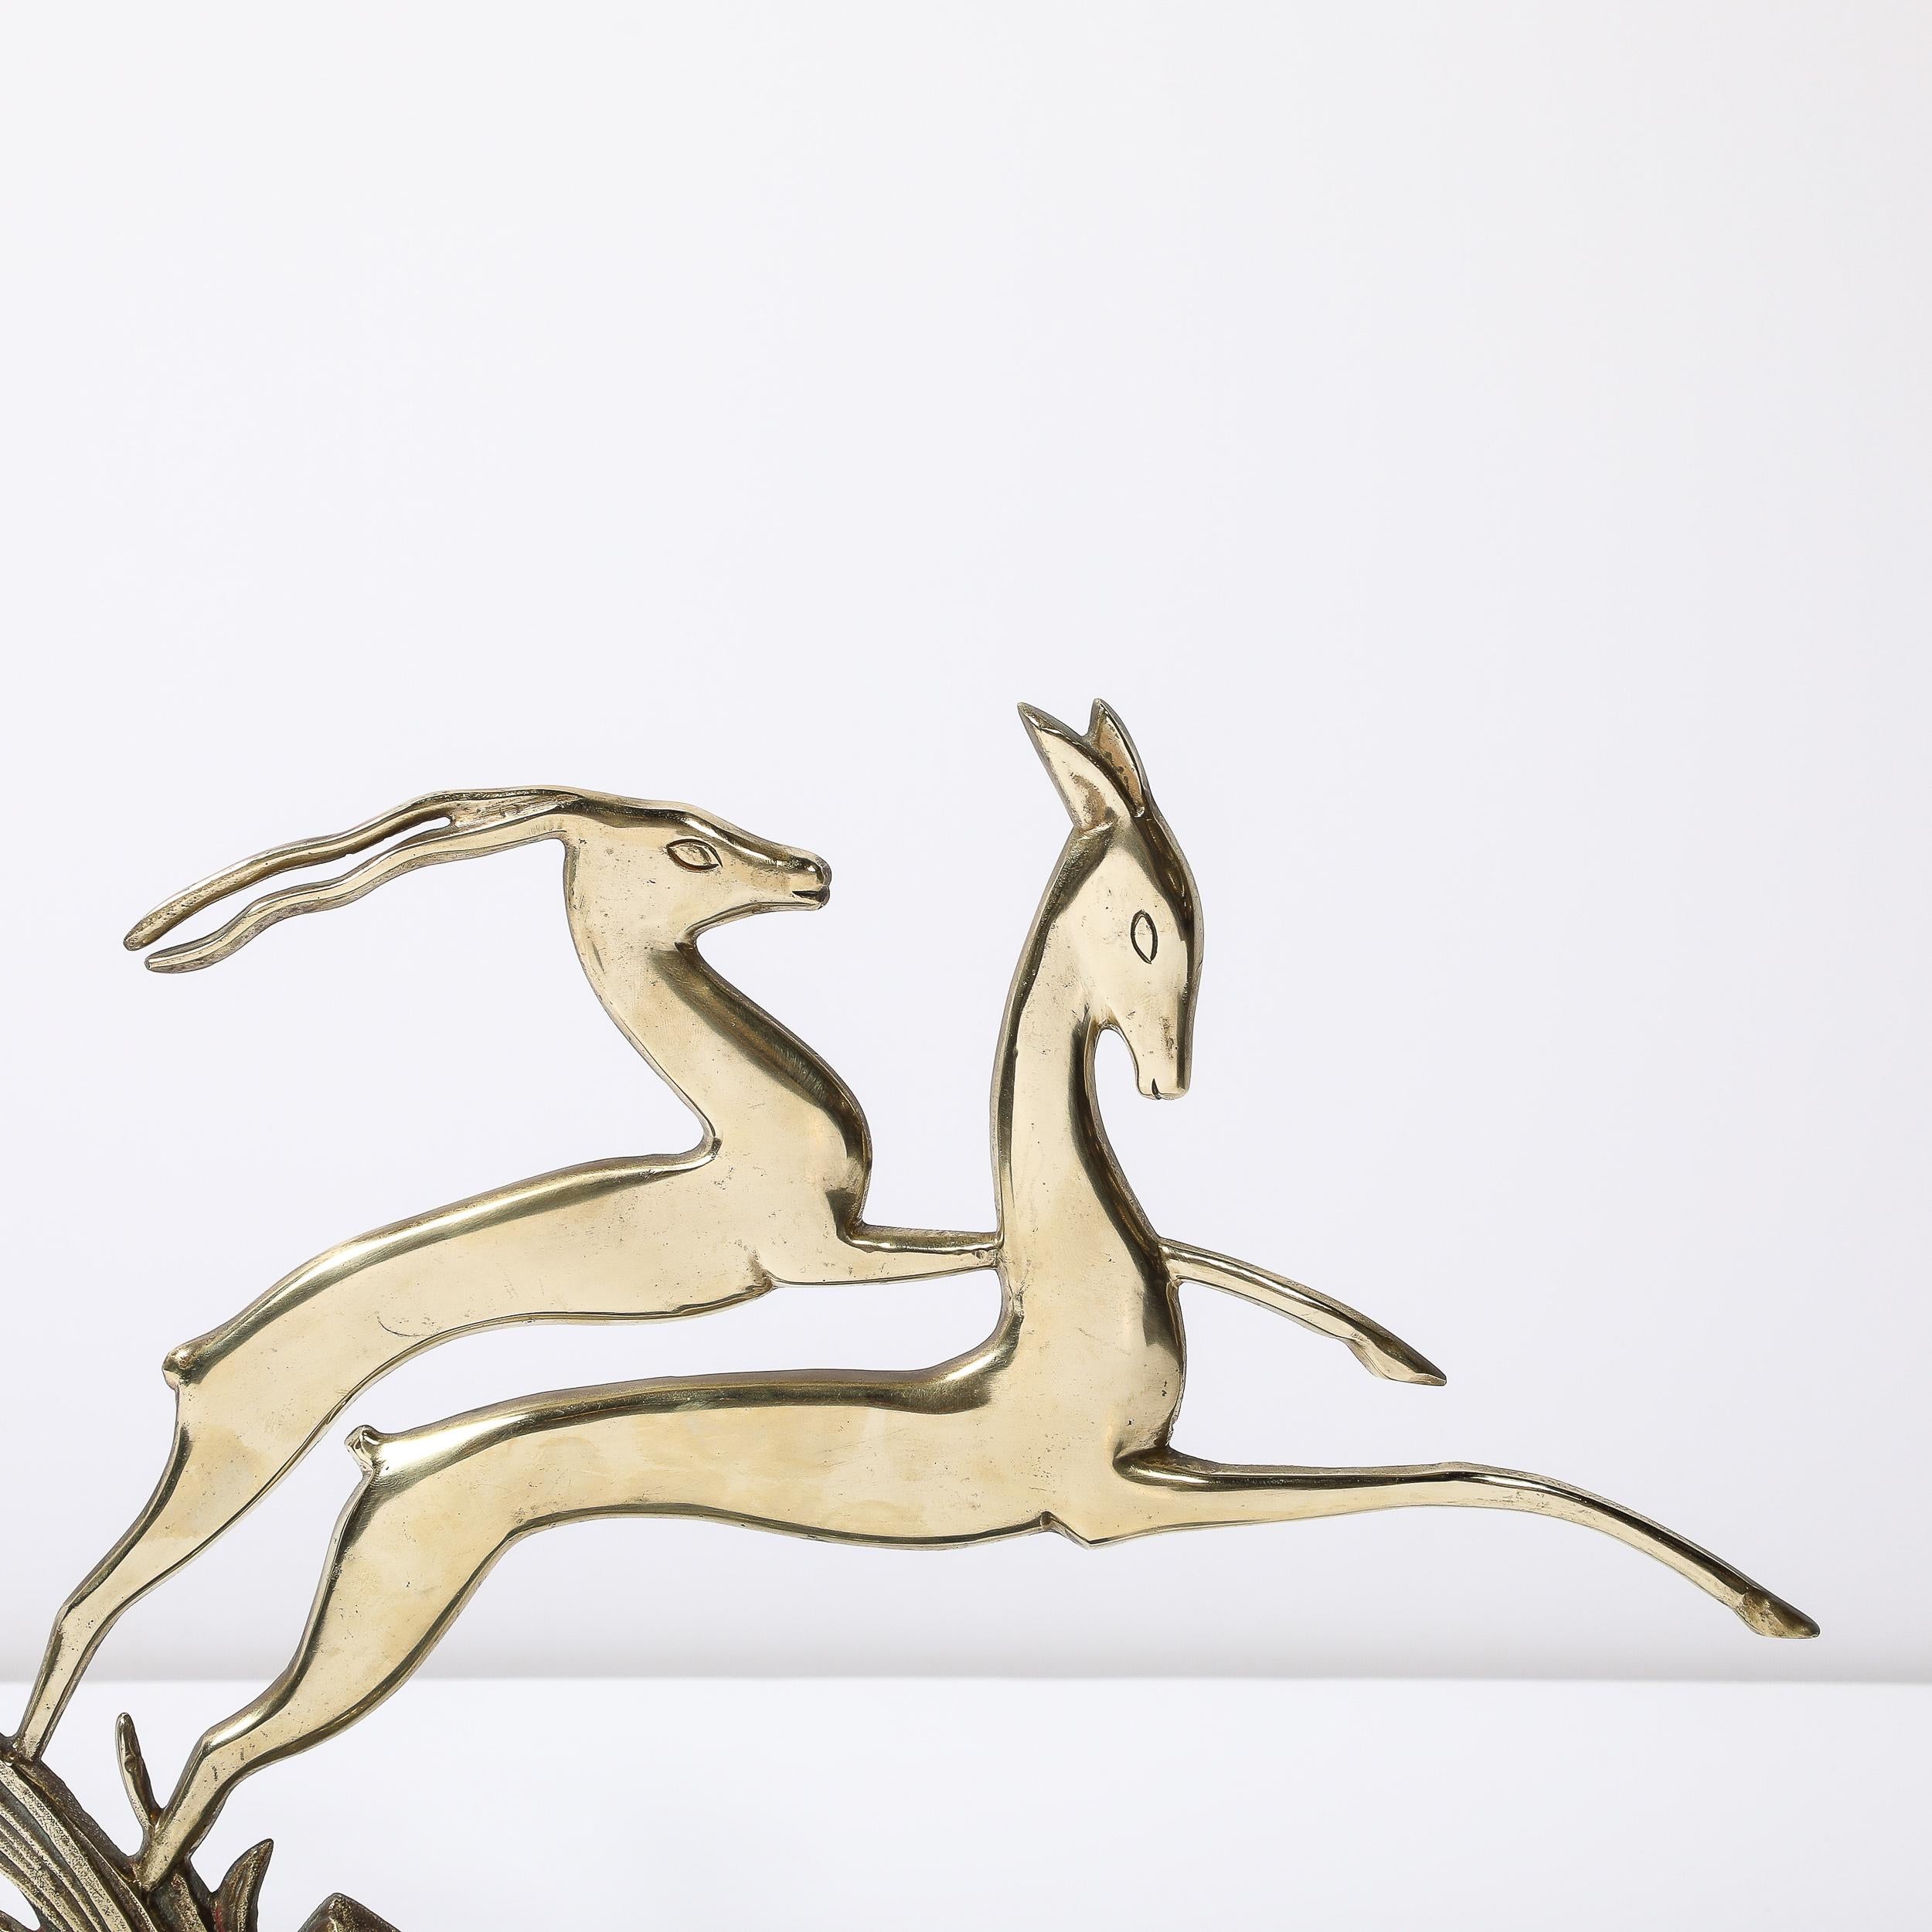 This beautifully formed and striking Art Deco Leaping Gazelle Sculpture in Polished Brass on Black Marble Base originates from France, Circa 1930. Featuring an open construction in gleaming polish brass depicting two leaping gazelles, one with